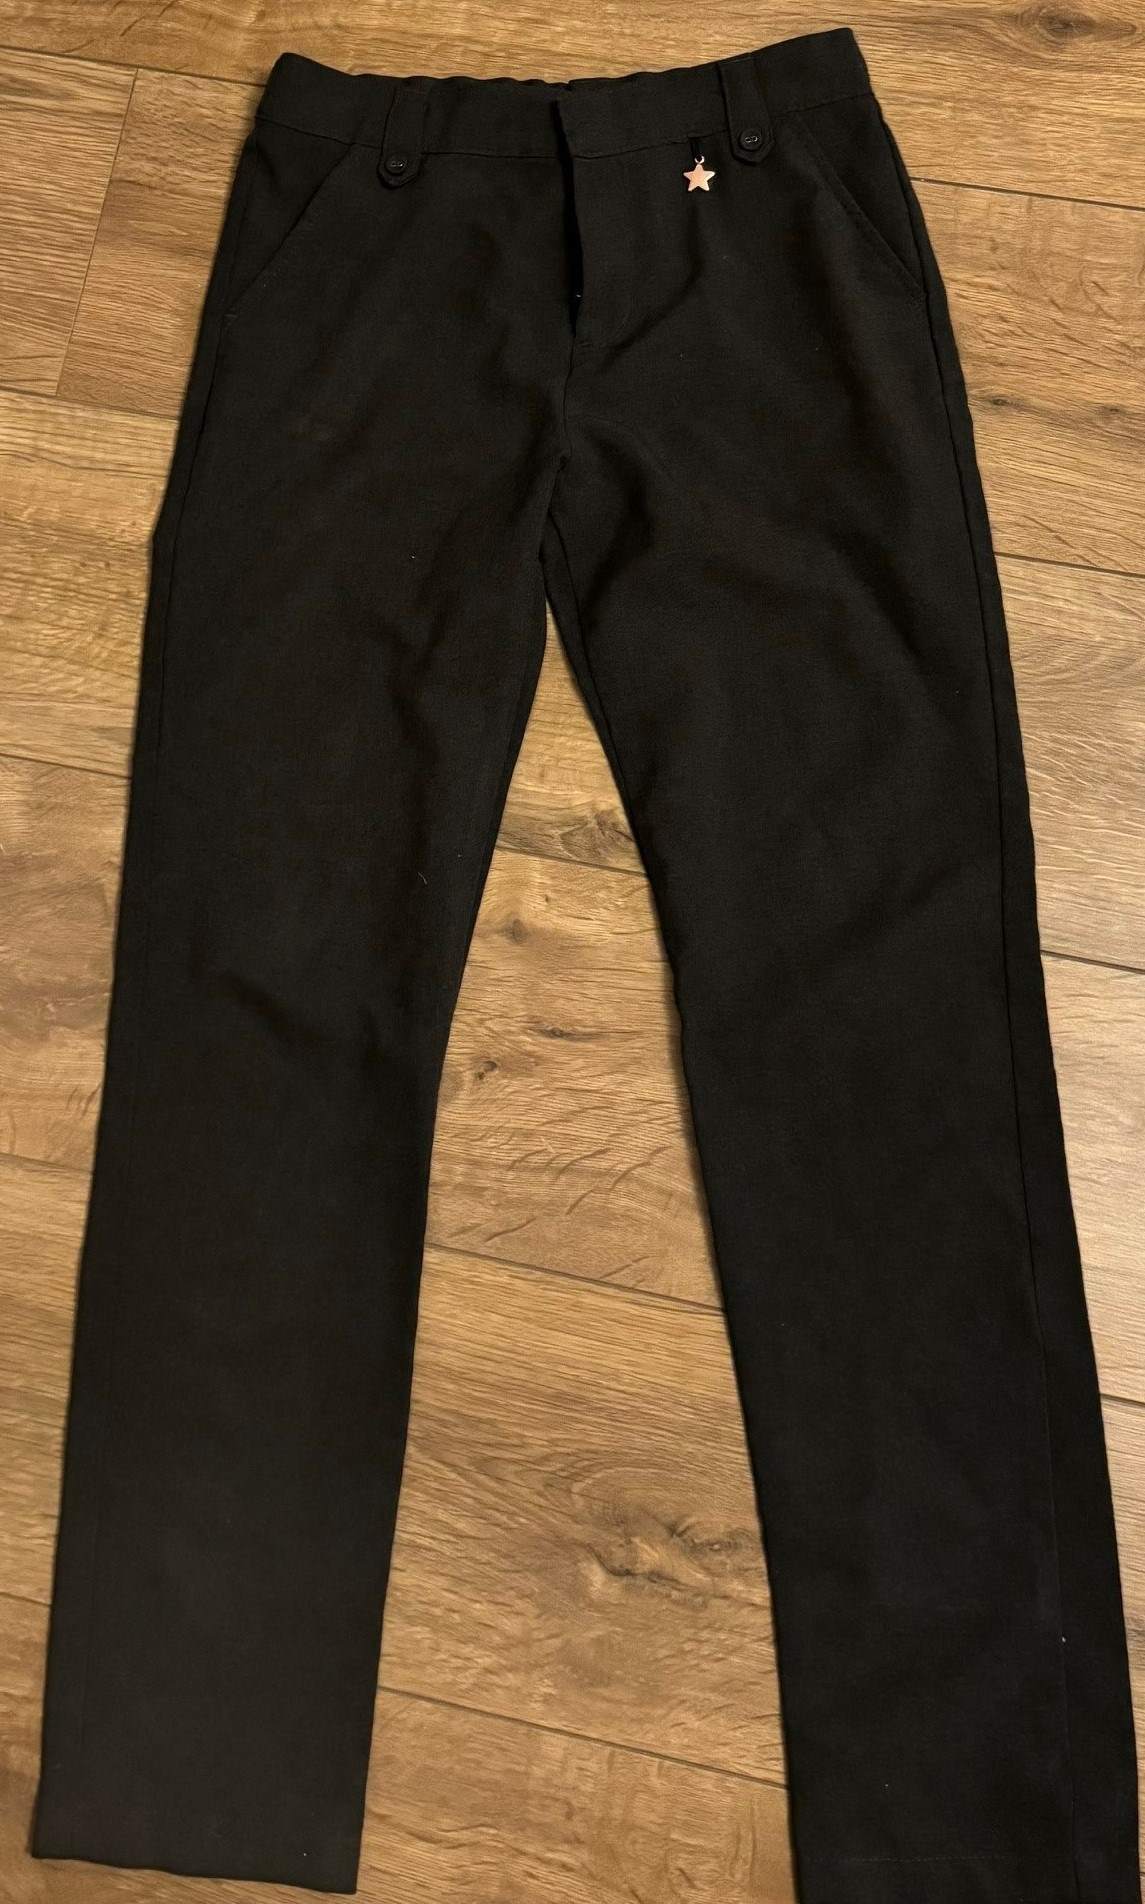 Trousers (with bows or charms) 10-11 yrs